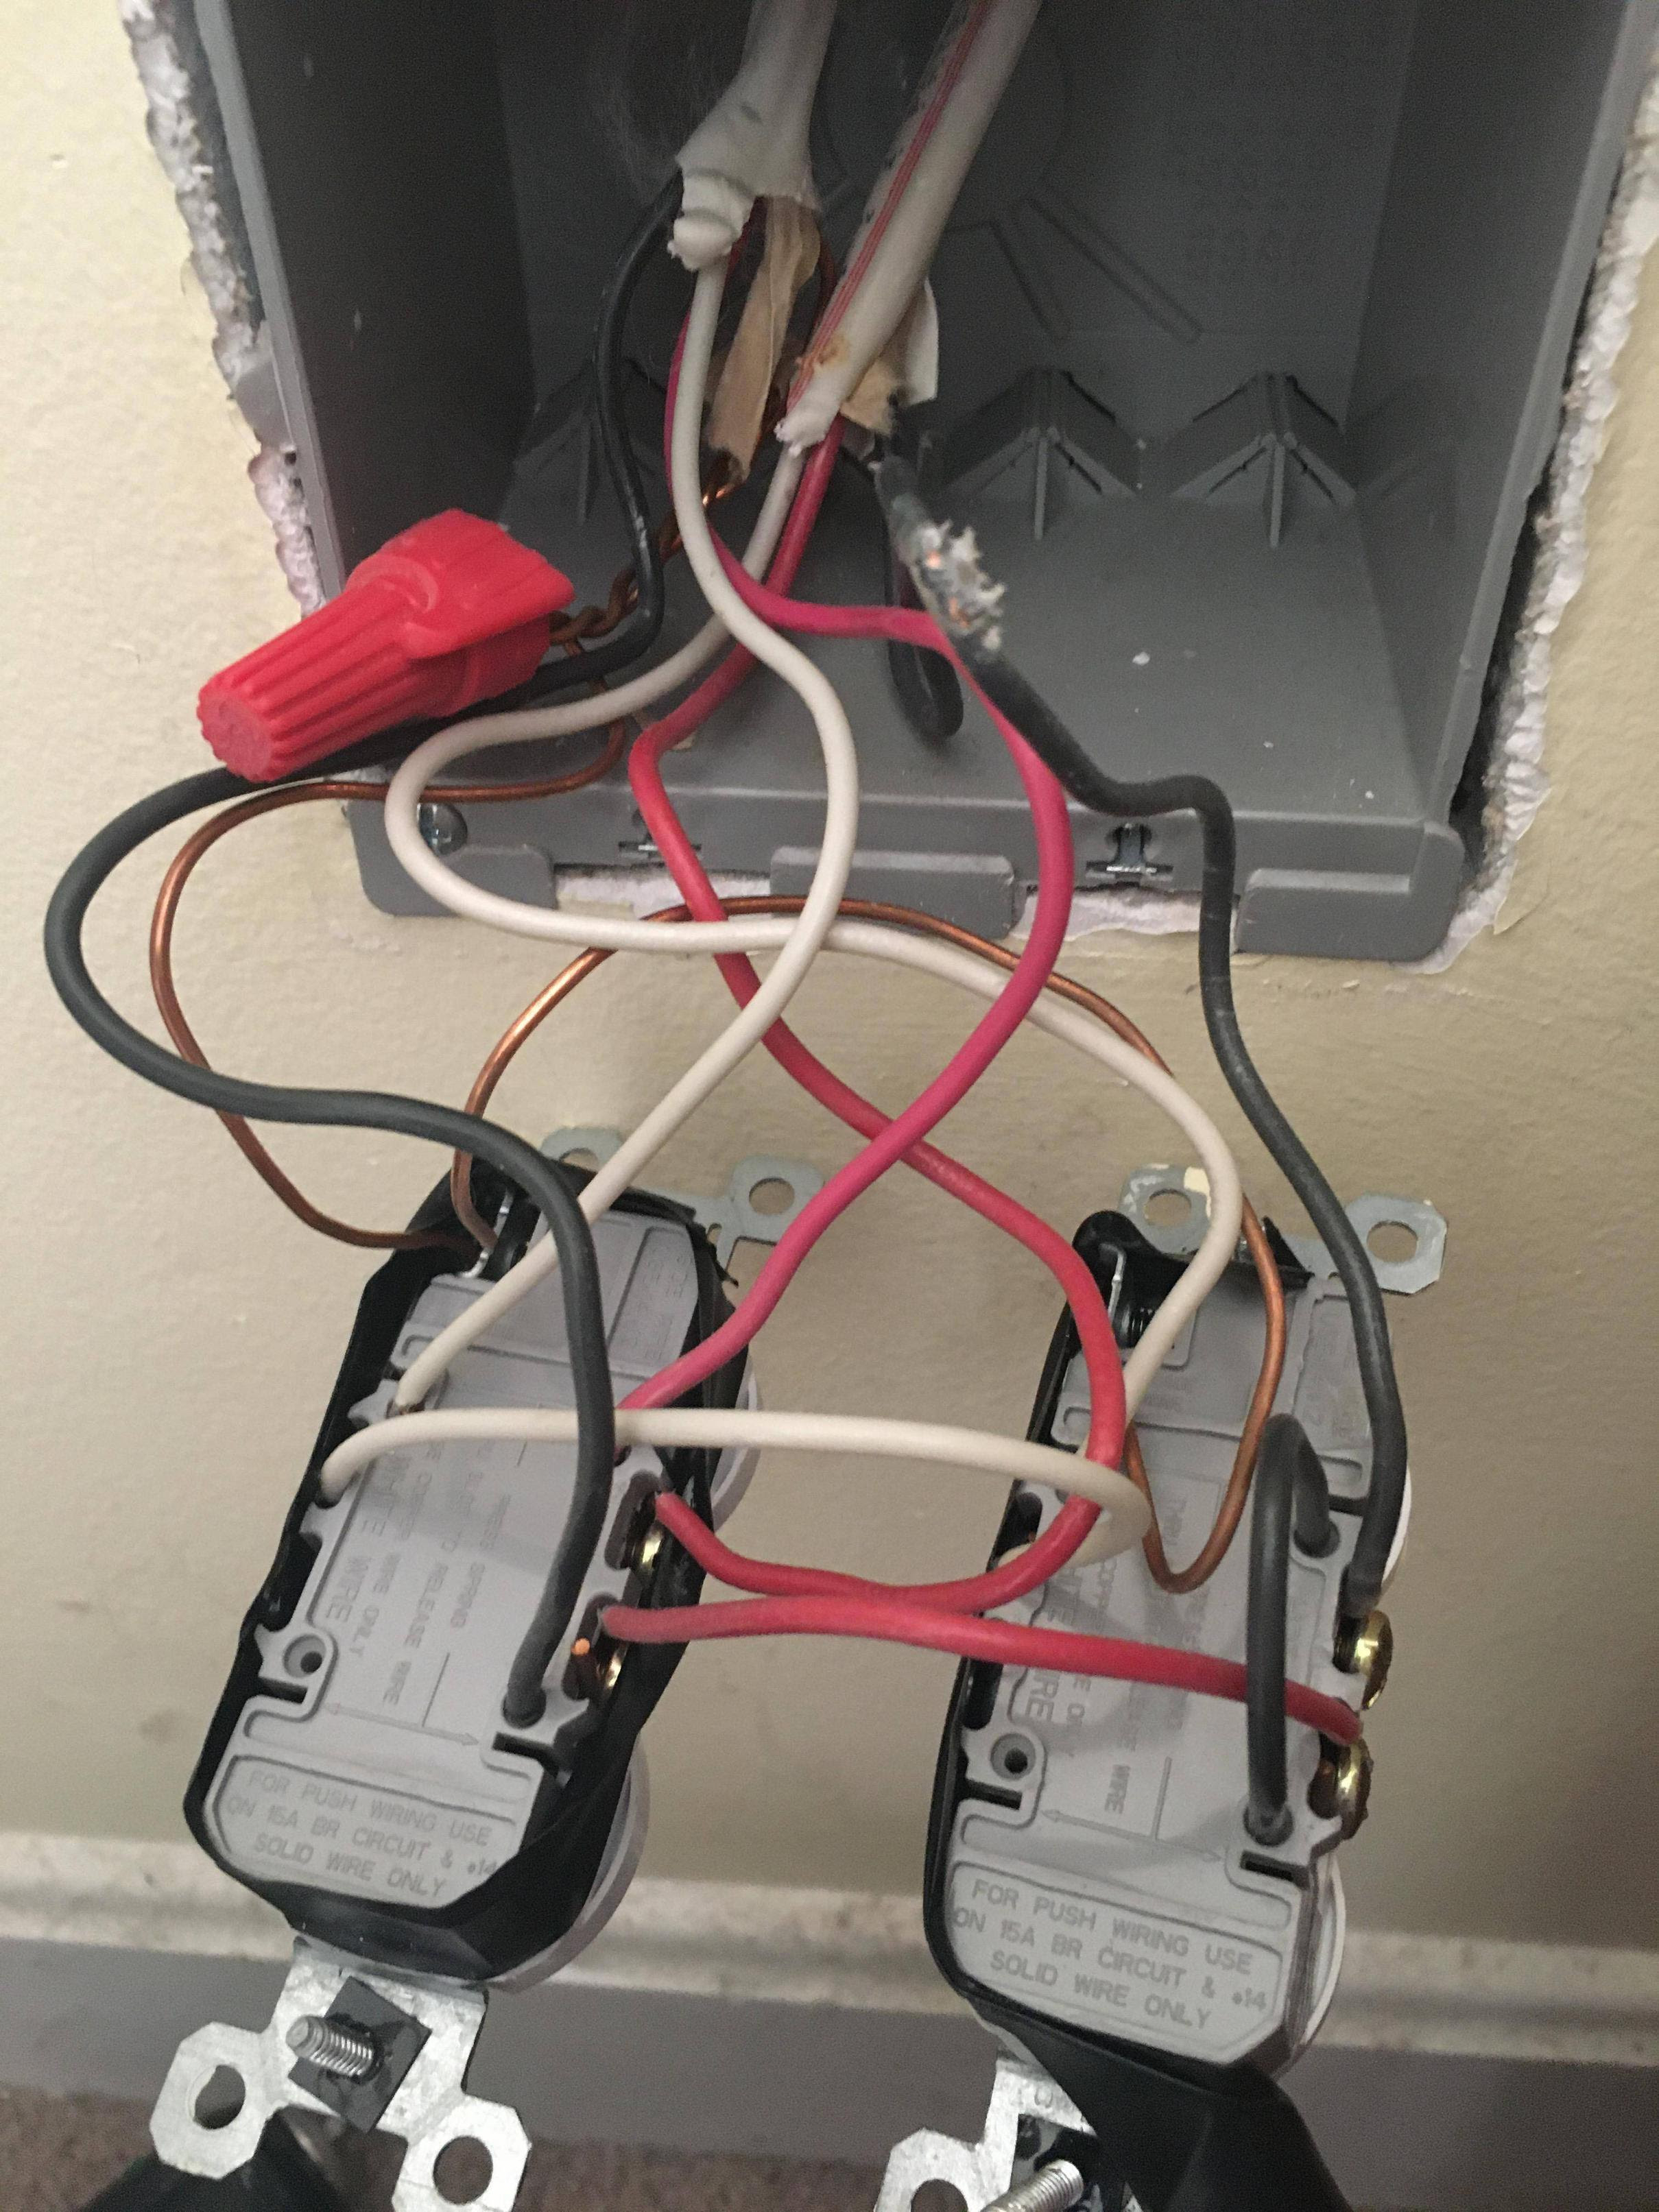 2 Gang Box Wiring Diagram / How Do I Properly Wire Gfci Outlets In